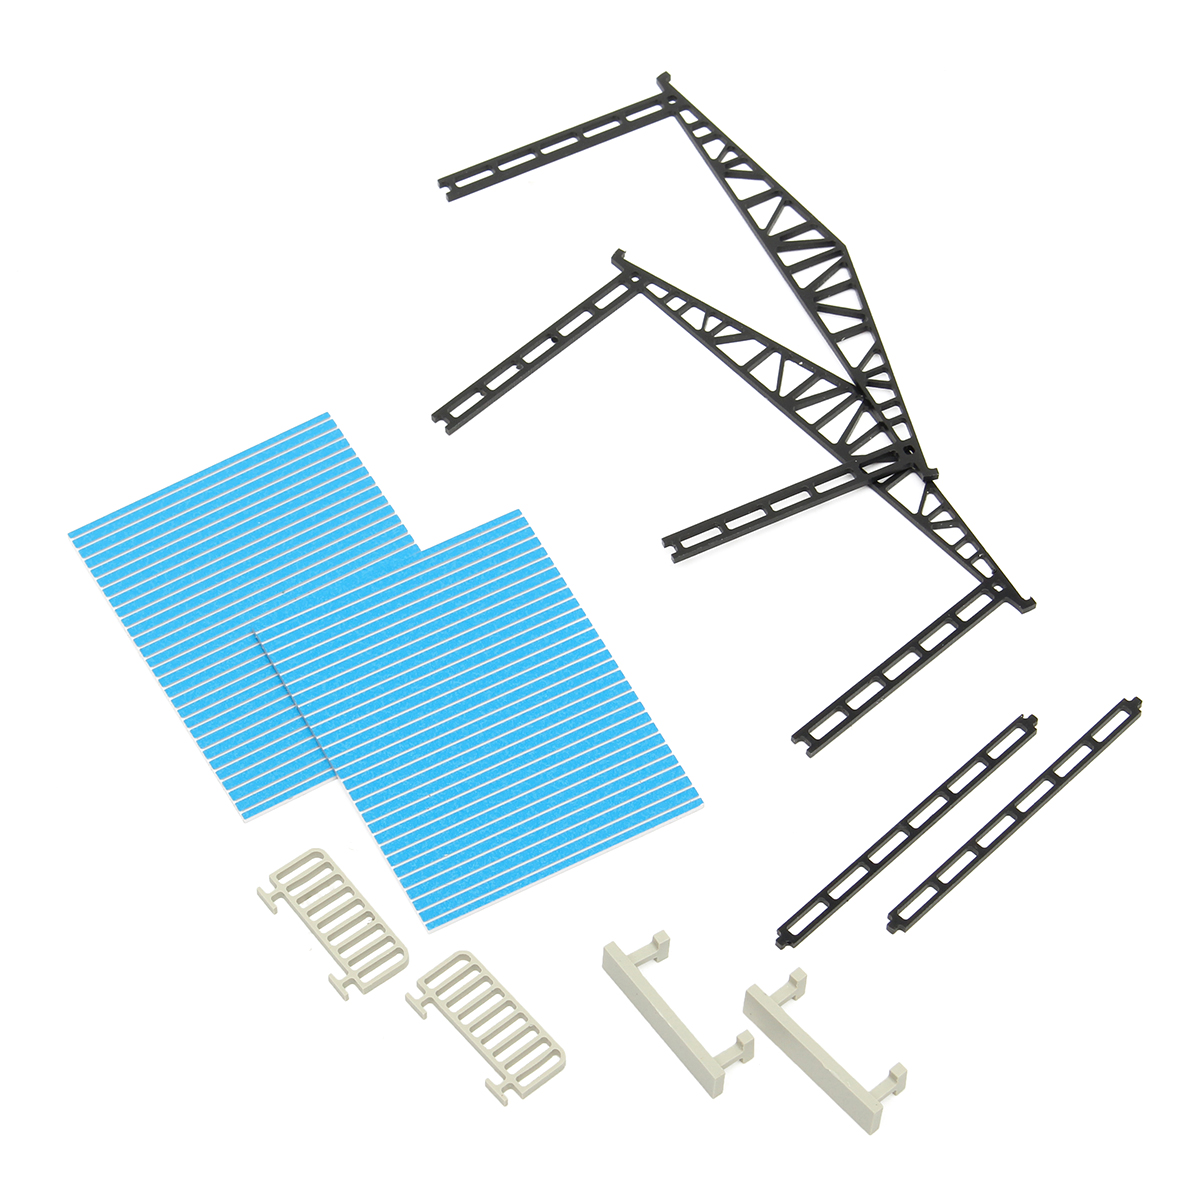 Model-Layout-Building-Parking-Shed-With-2-Fences-2-Benches-HO-Scale-187-Kit-1093333-6